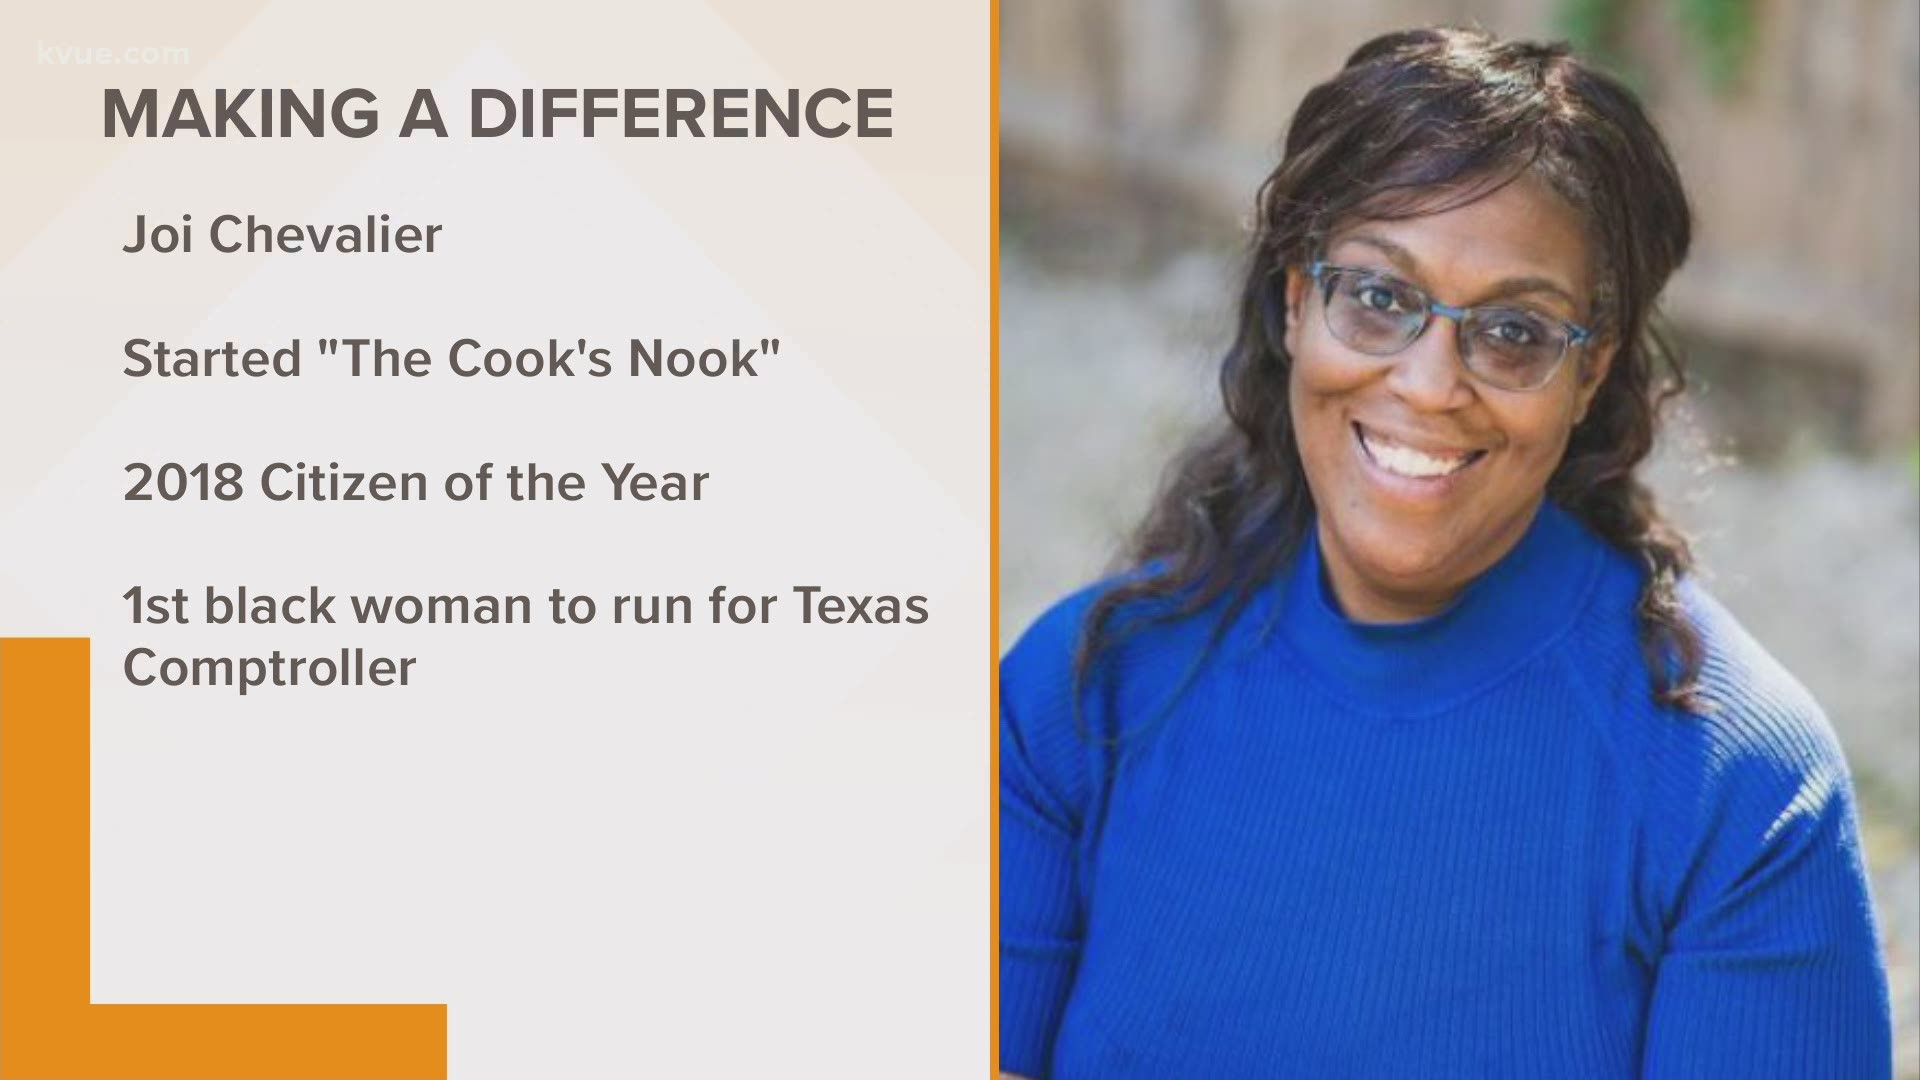 Joi started The Cook’s Nook, Austin’s first shared commercial kitchen and culinary incubator after spending nearly 20 years in the tech industry.